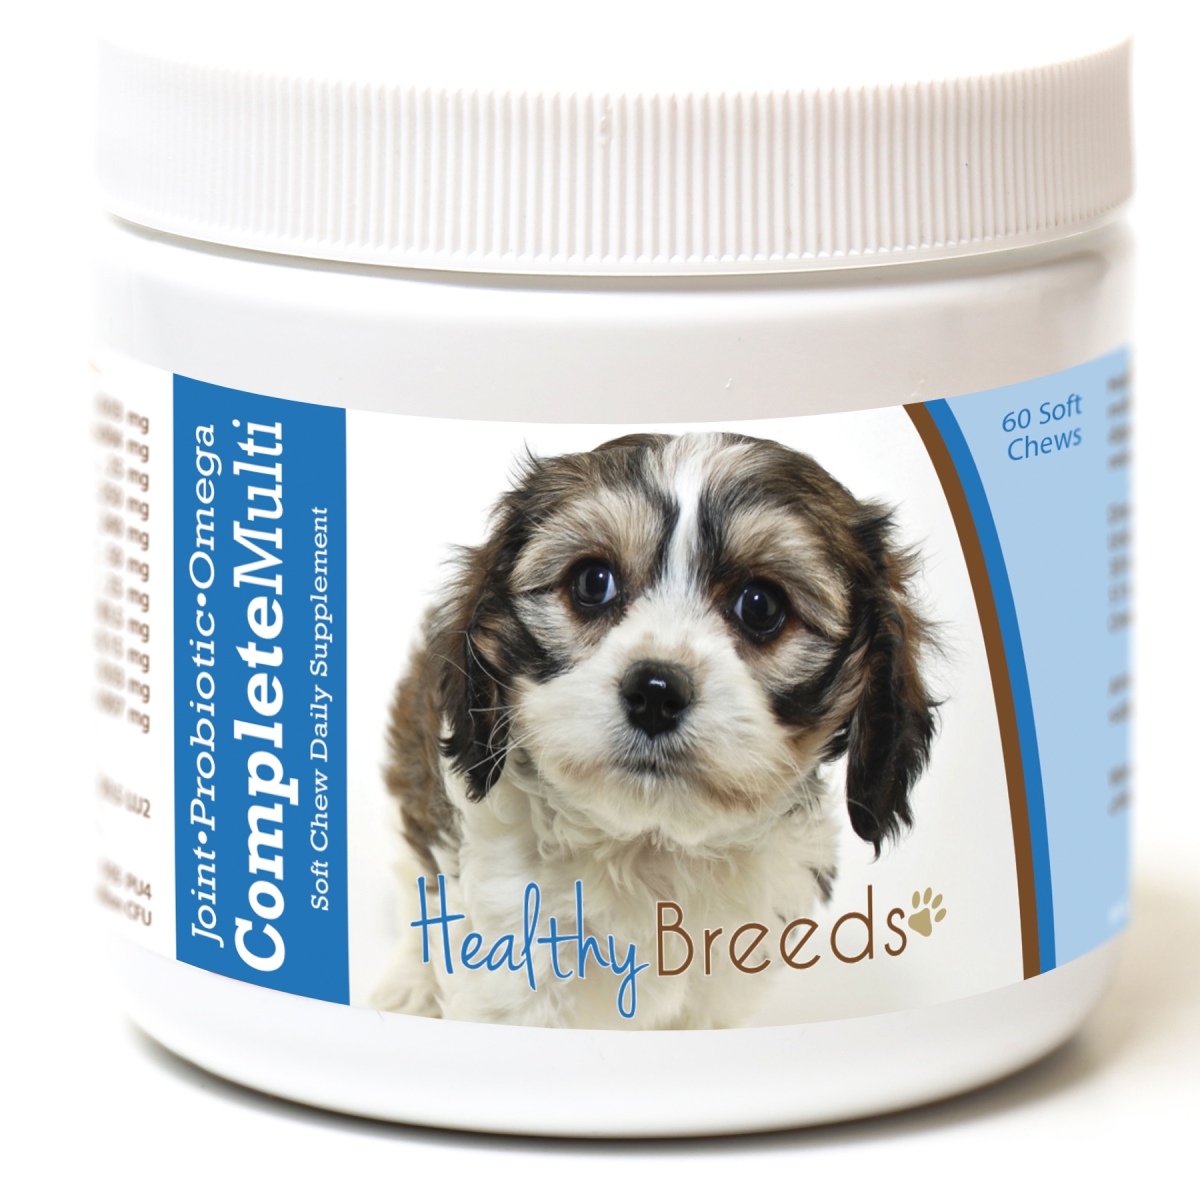 Picture of Healthy Breeds 192959007640 Cavachon All in One Multivitamin Soft Chew - 60 Count